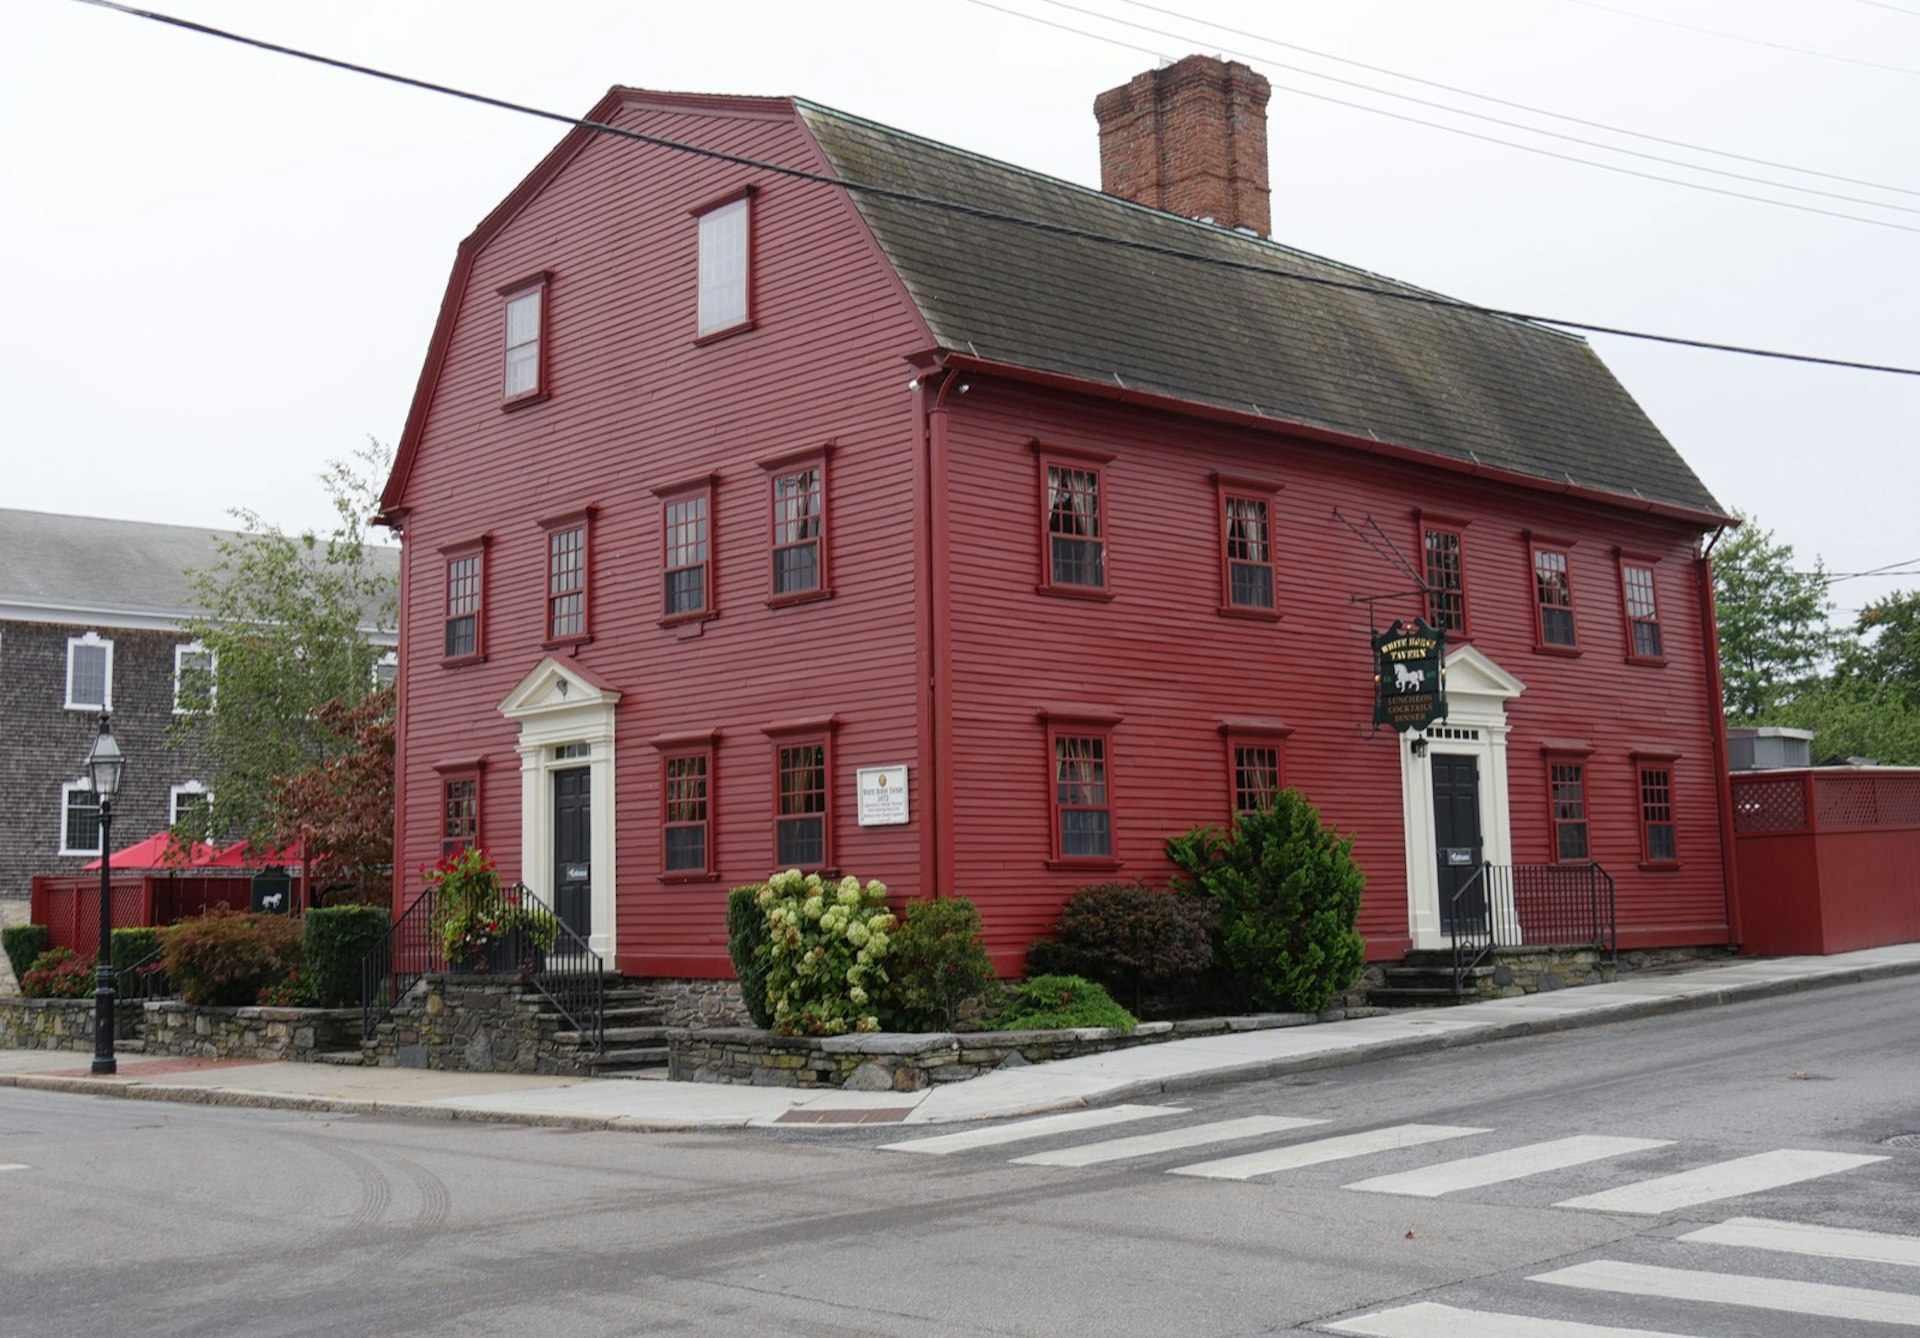 Side view of the White Horse Tavern, known to be America’s oldest tavern established in 1673